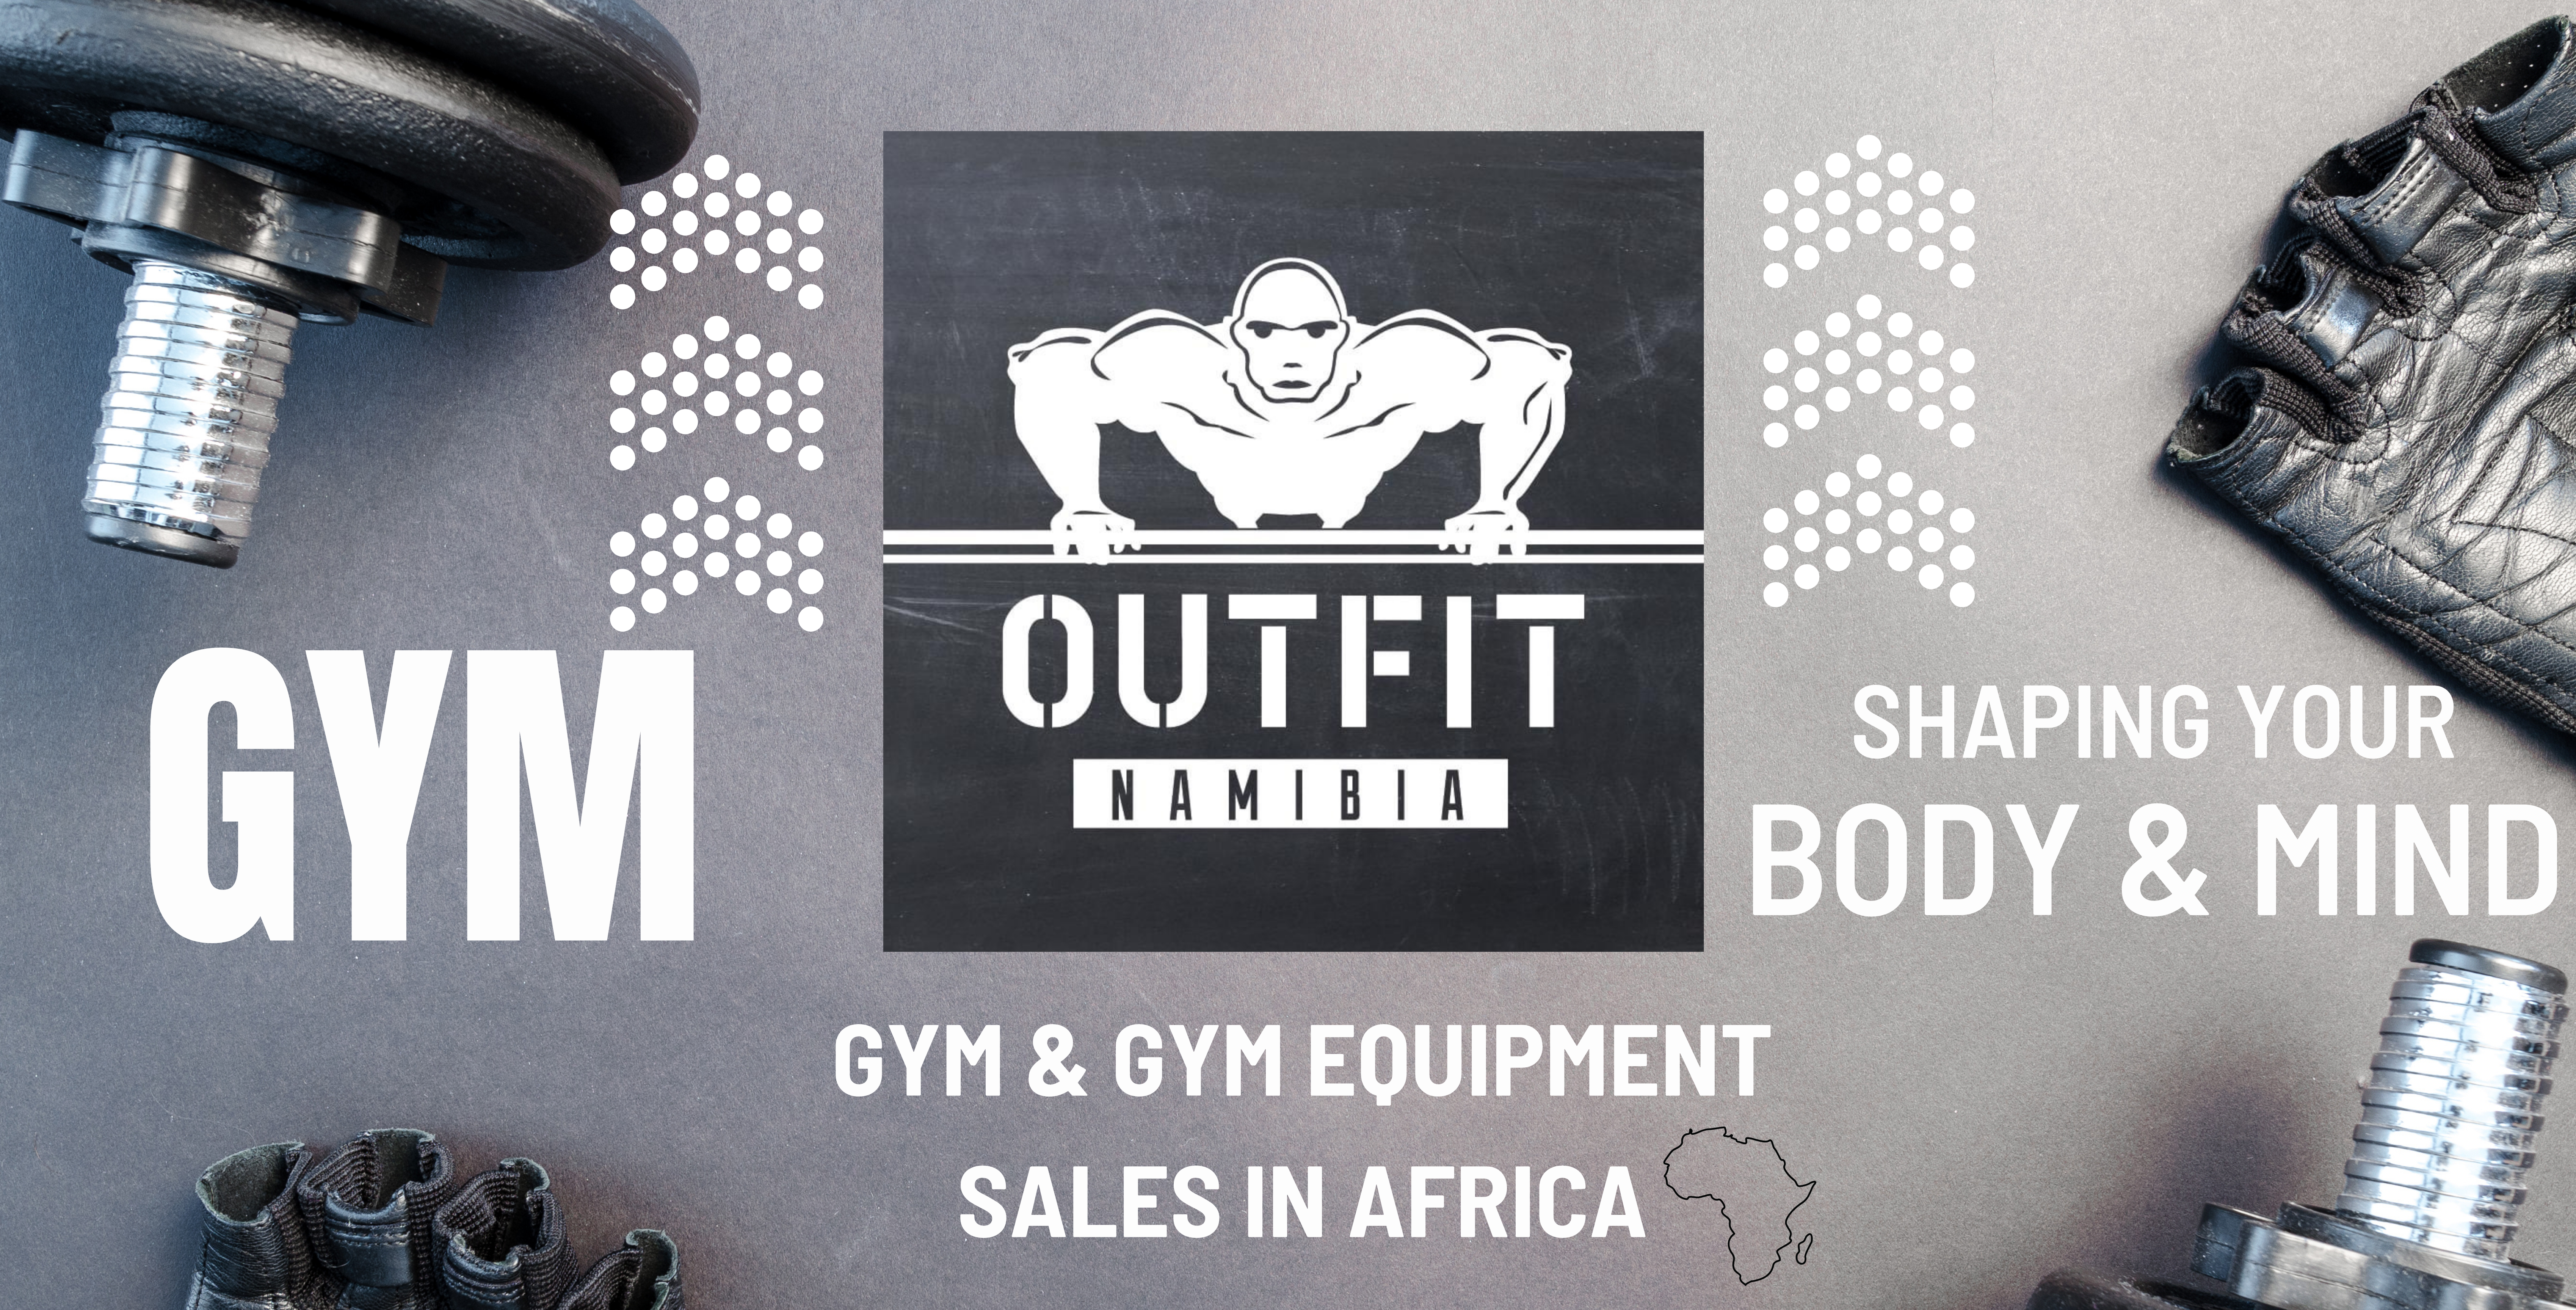 Outfit Namibia Gym Banner